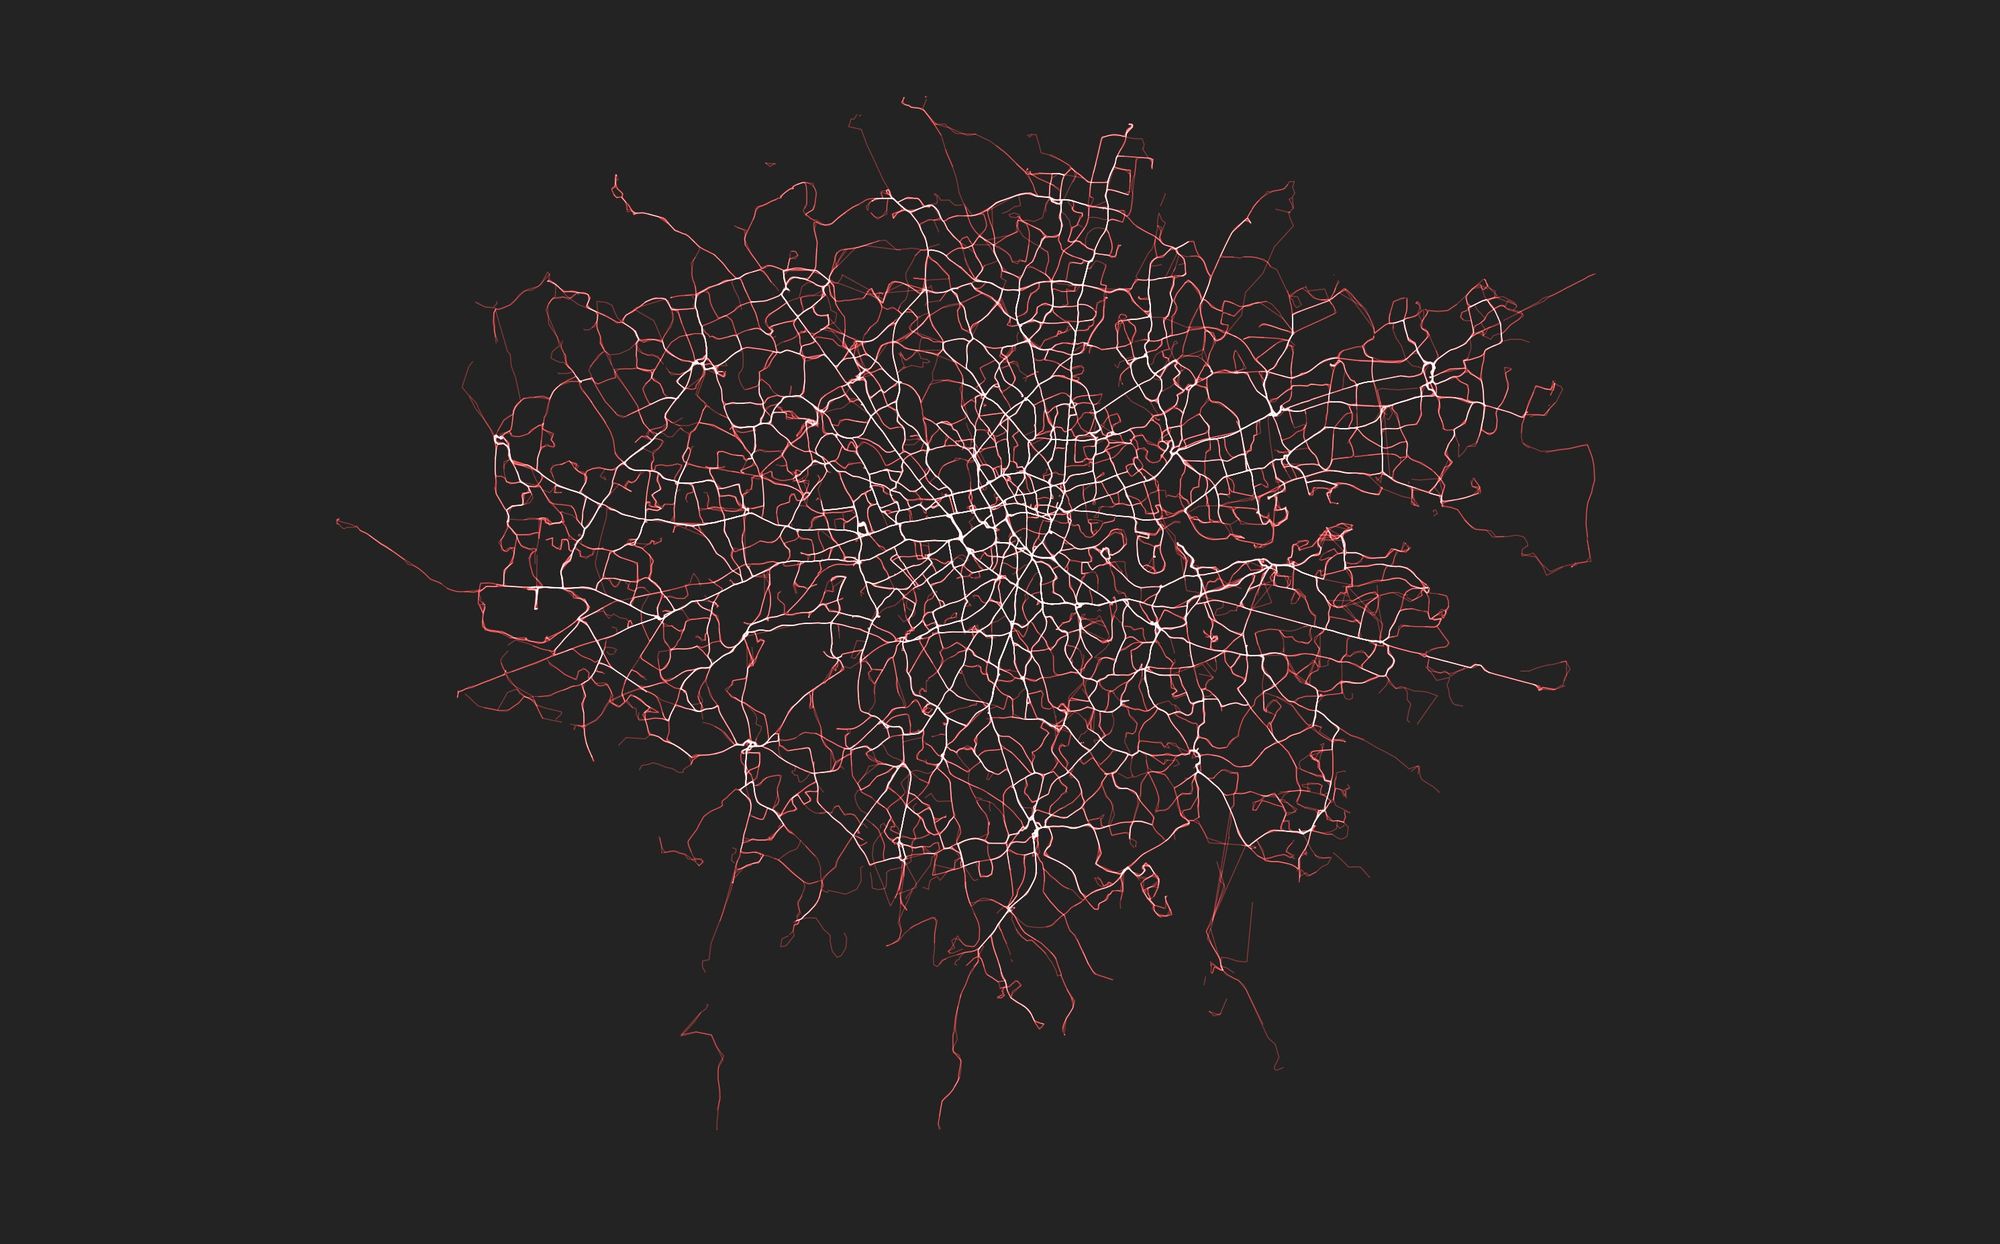 Mapping every bus in London over a period of 15 minutes